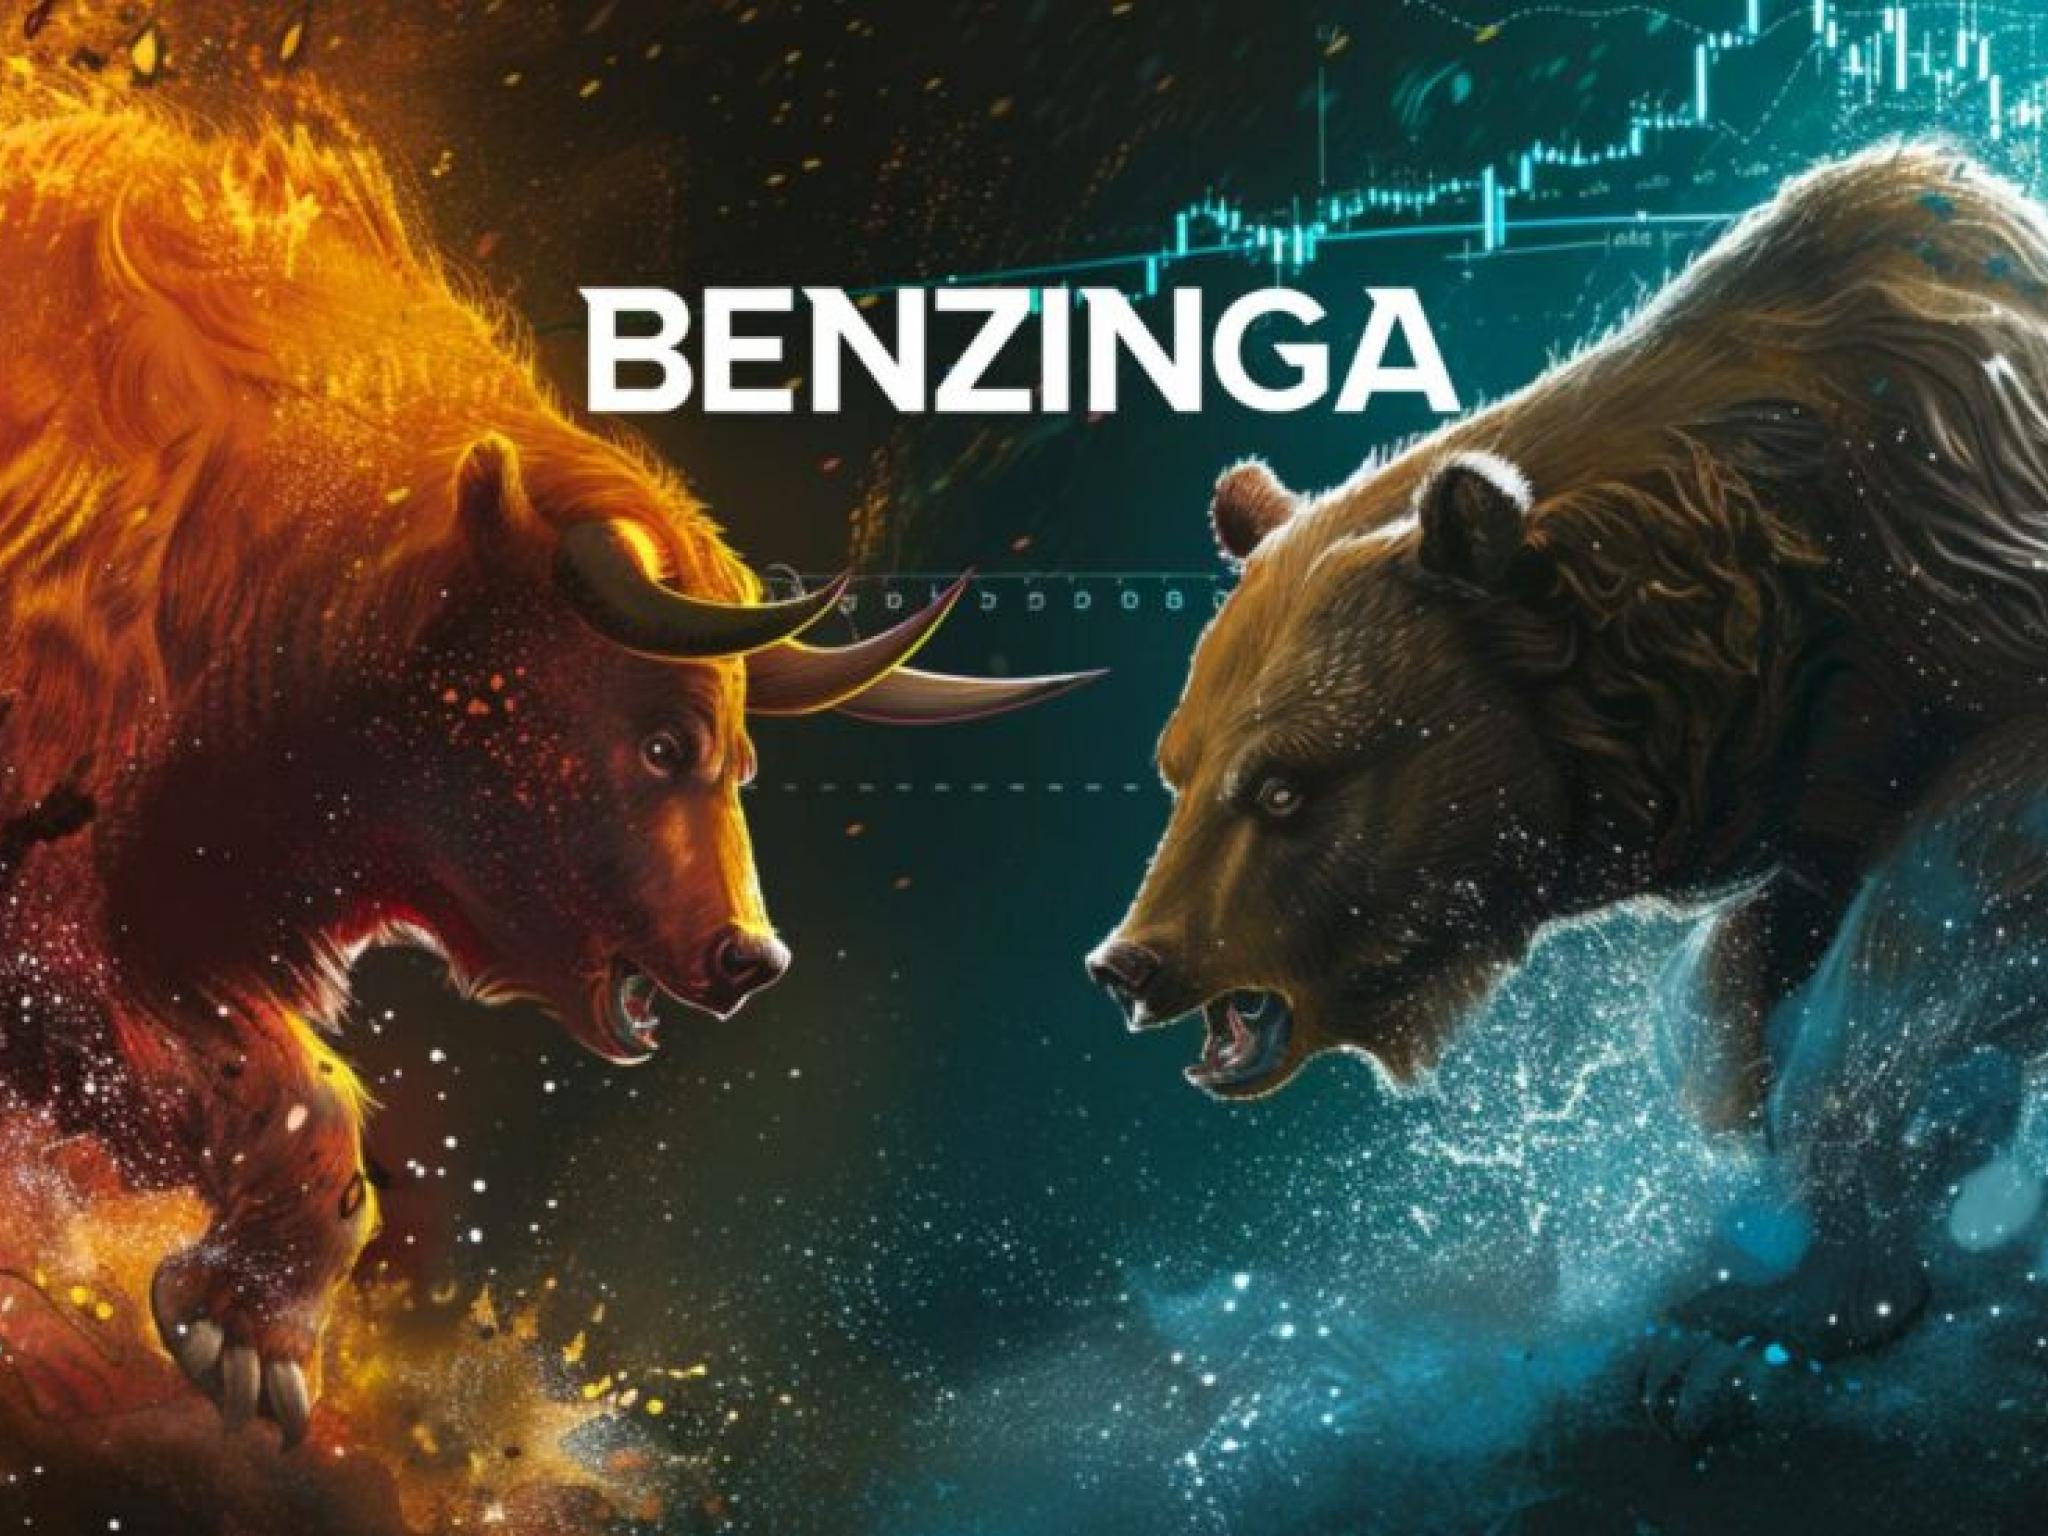  benzinga-bulls-and-bears-gamestop-nvidia-tesla-amazon-and-dogecoin-trader-predicts-breakout-to-occur-any-day 